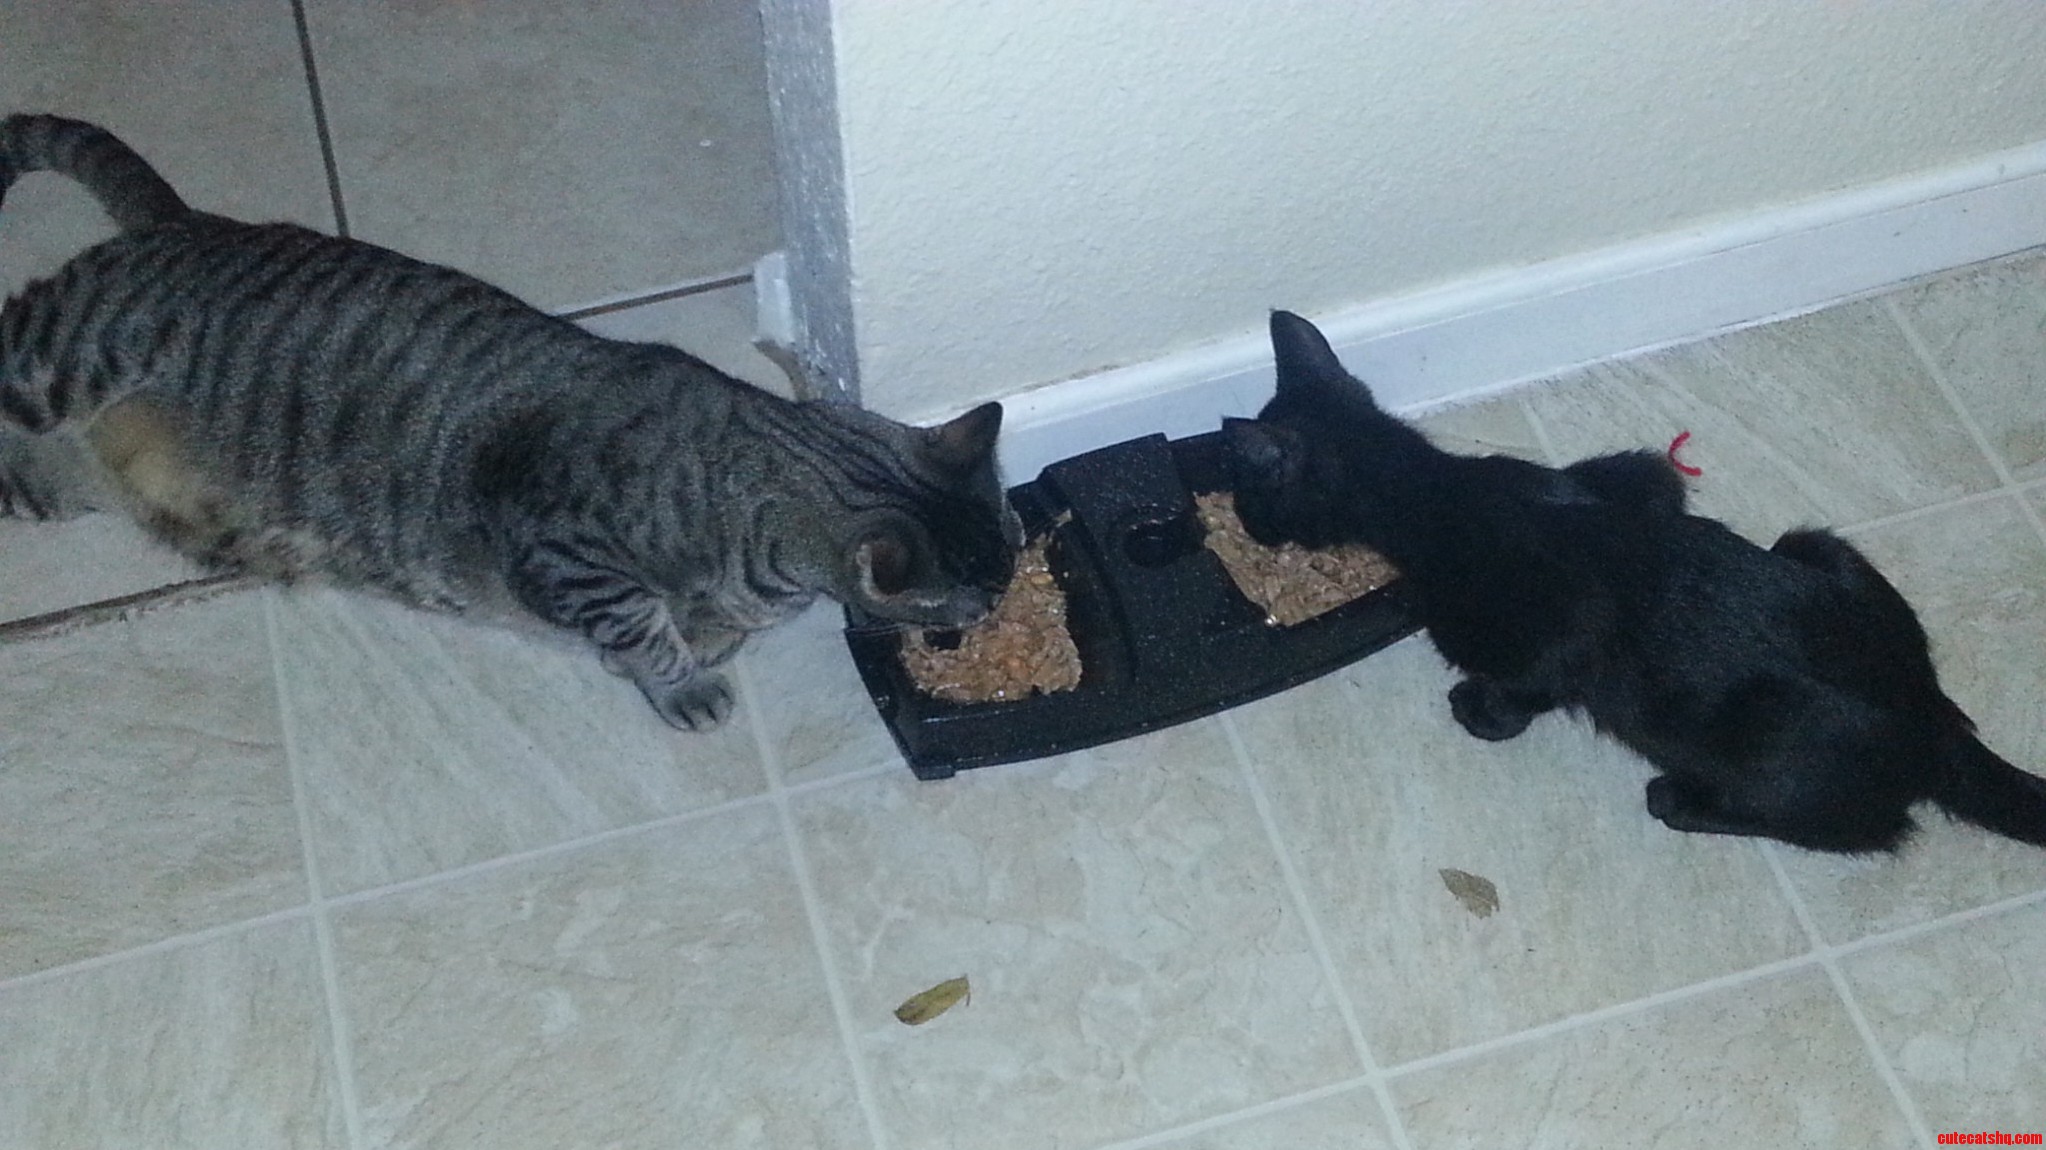 My Cat Is So Freaking Lazy He Wont Even Stand Up To Eat.